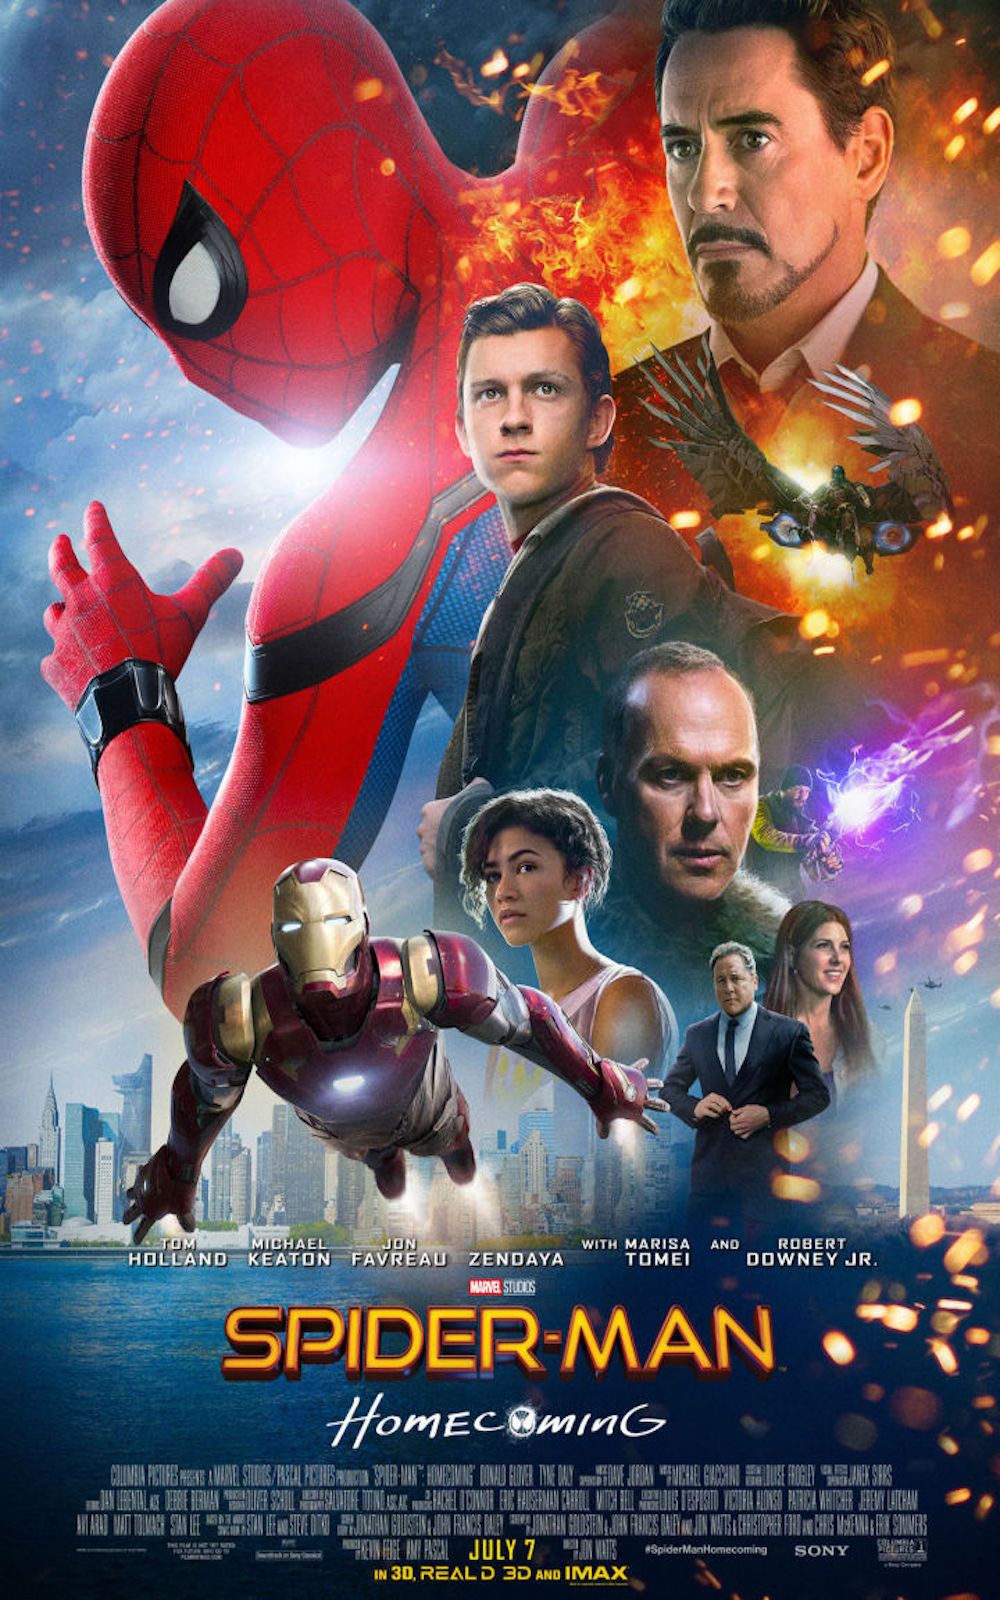 Movie Posters : Spider-Man: Homecoming (2017) - CoDesign ...